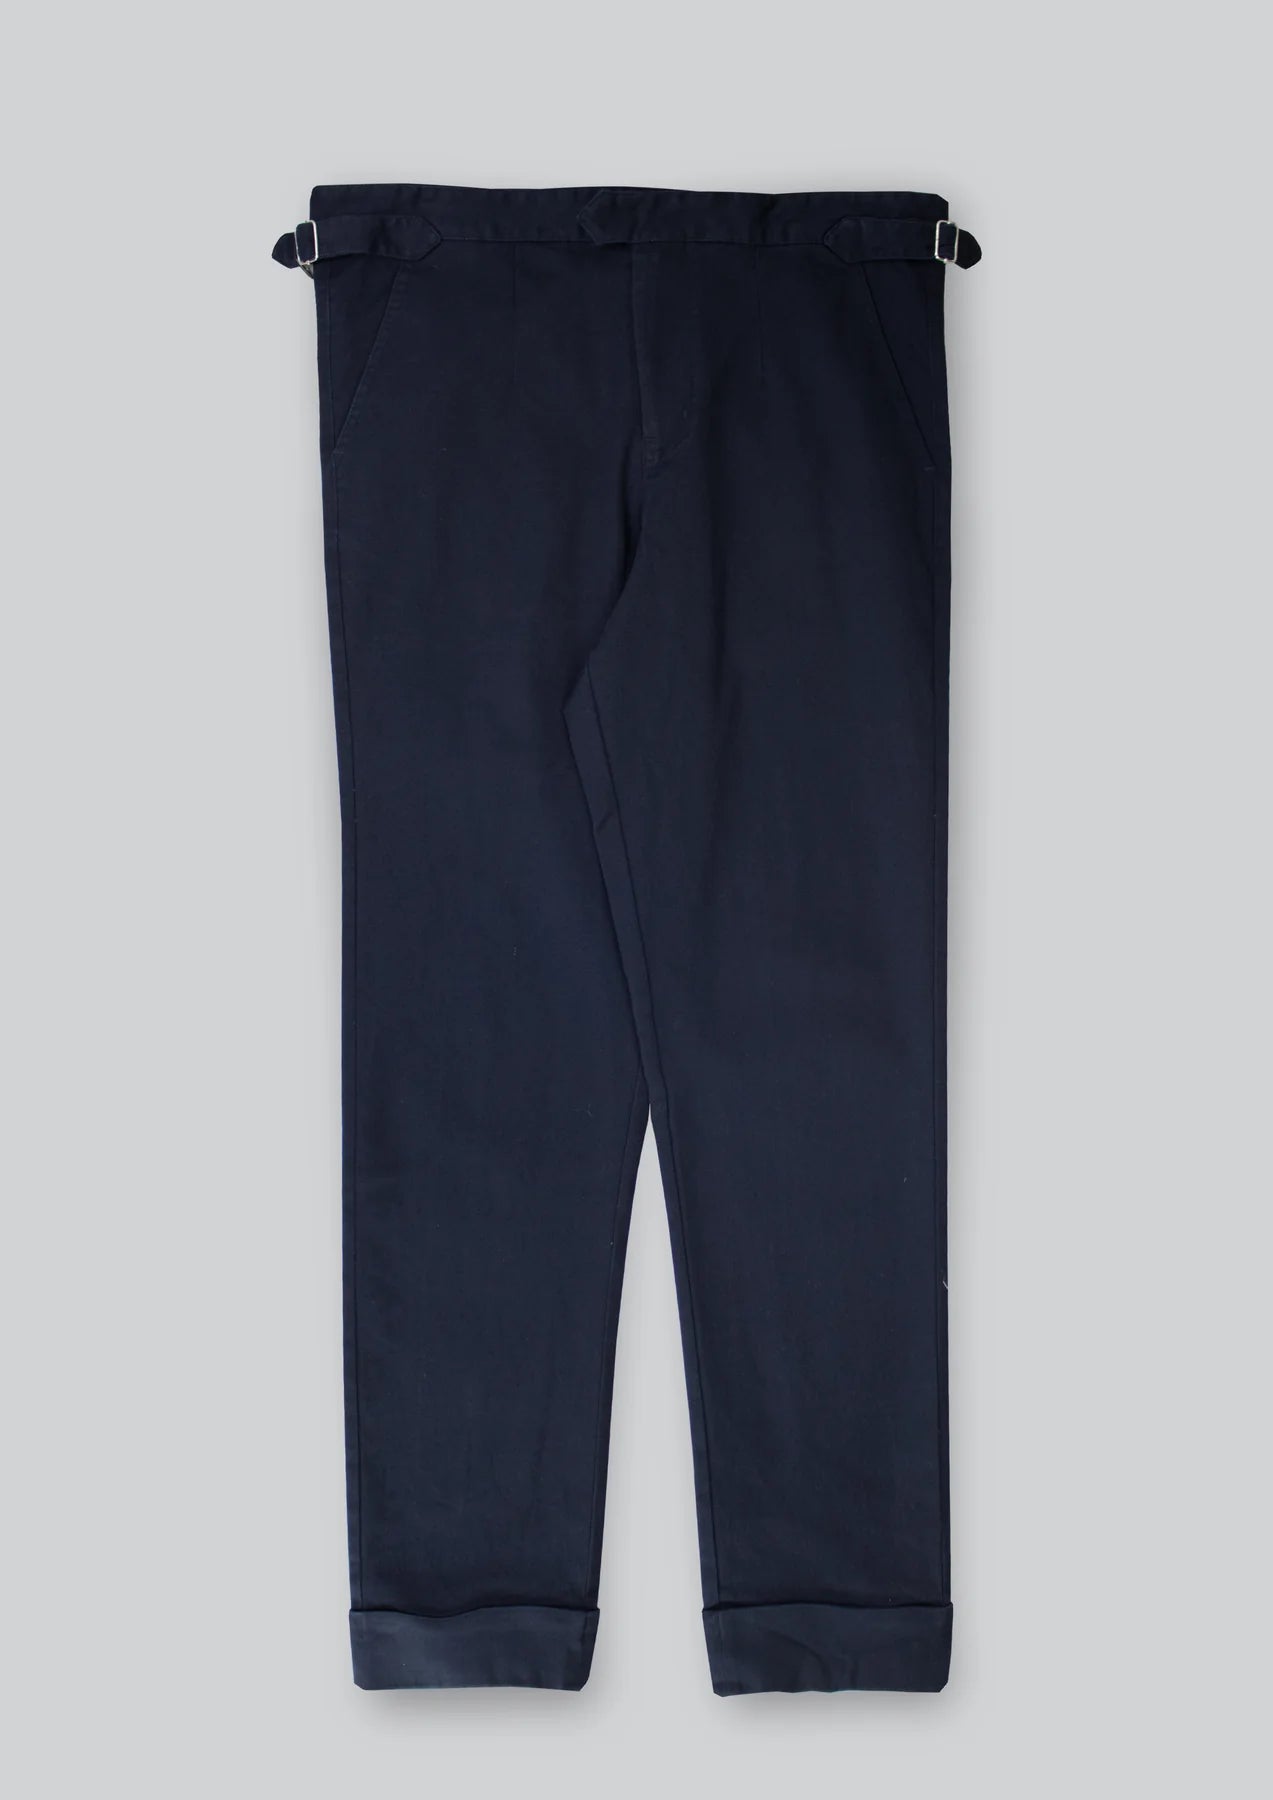 Cutler &amp; Co Iggy Trousers | Thunderstorm